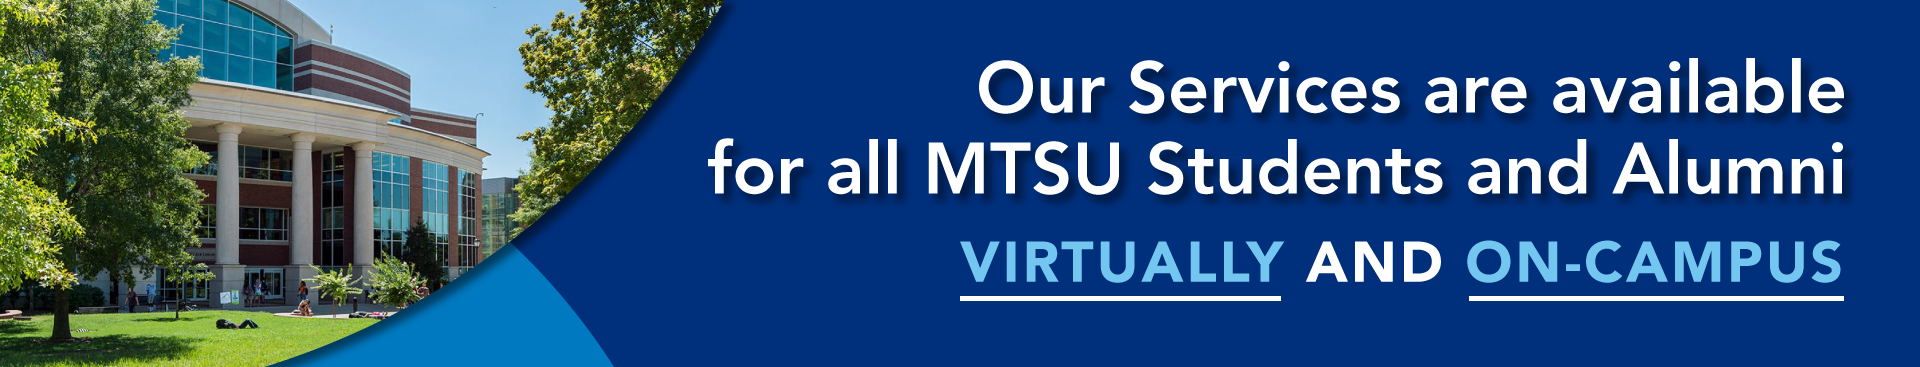 All Career Services are available for all MTSU students and Alumnivirtually and on-campus